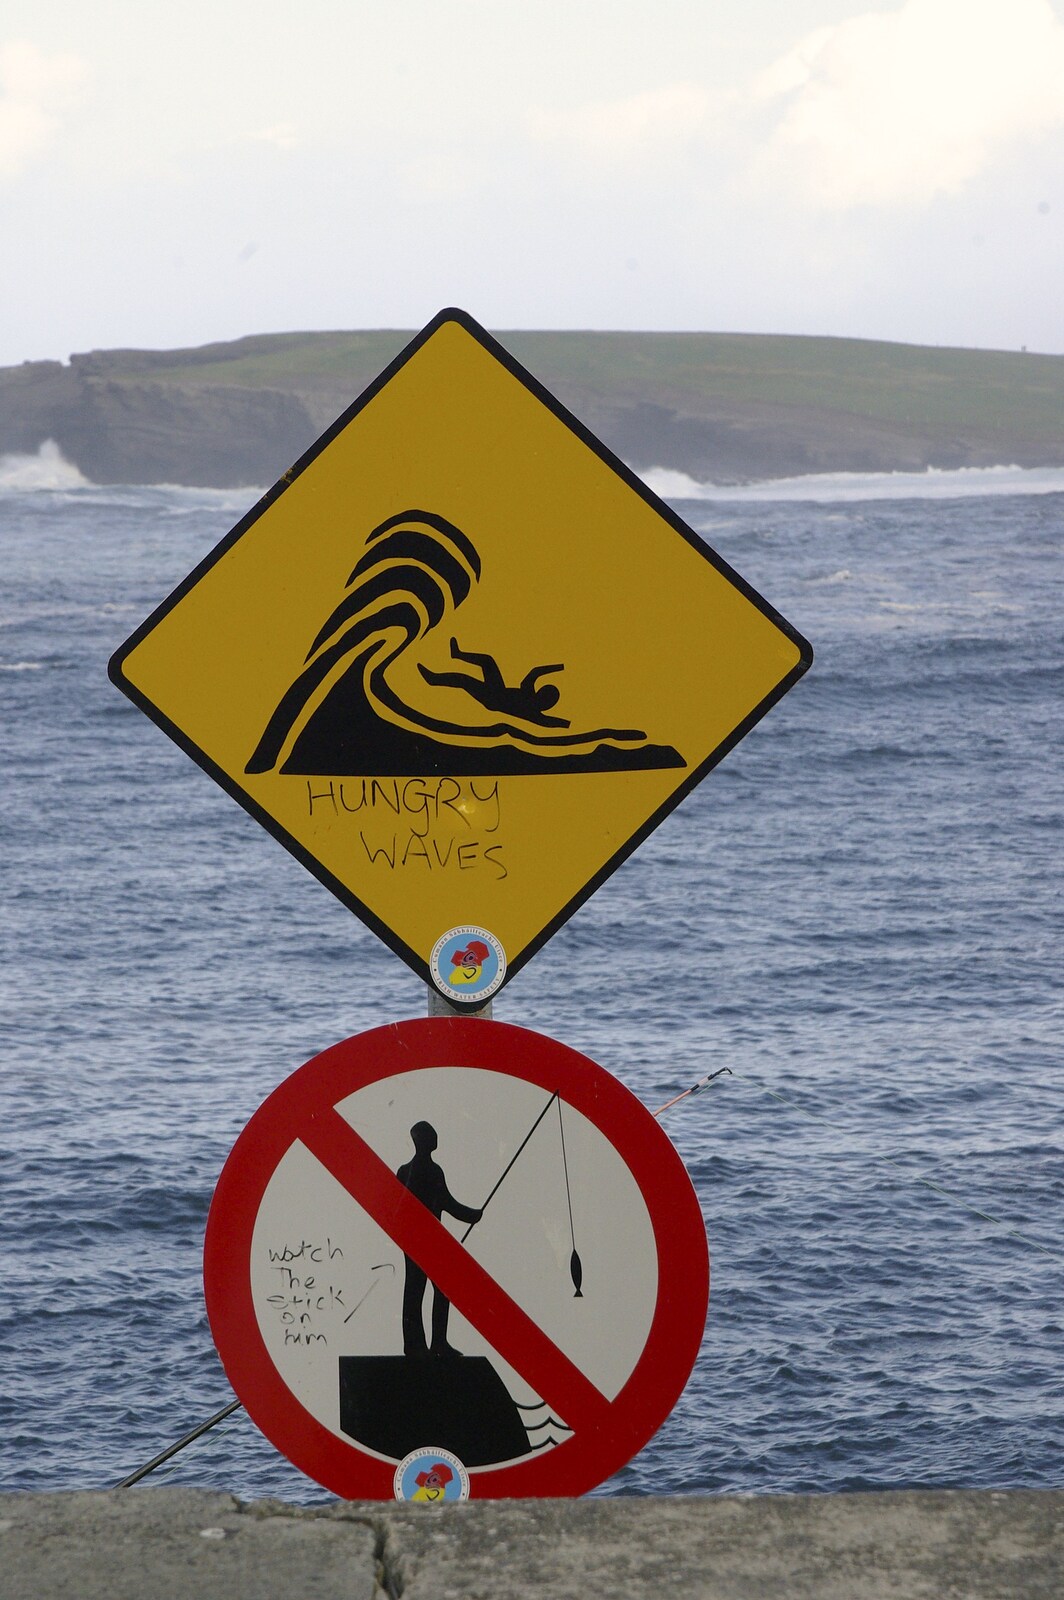 30th Birthday Party in Kilkee, County Clare, Ireland - 22nd September 2007: Warning signs have been amusingly modified